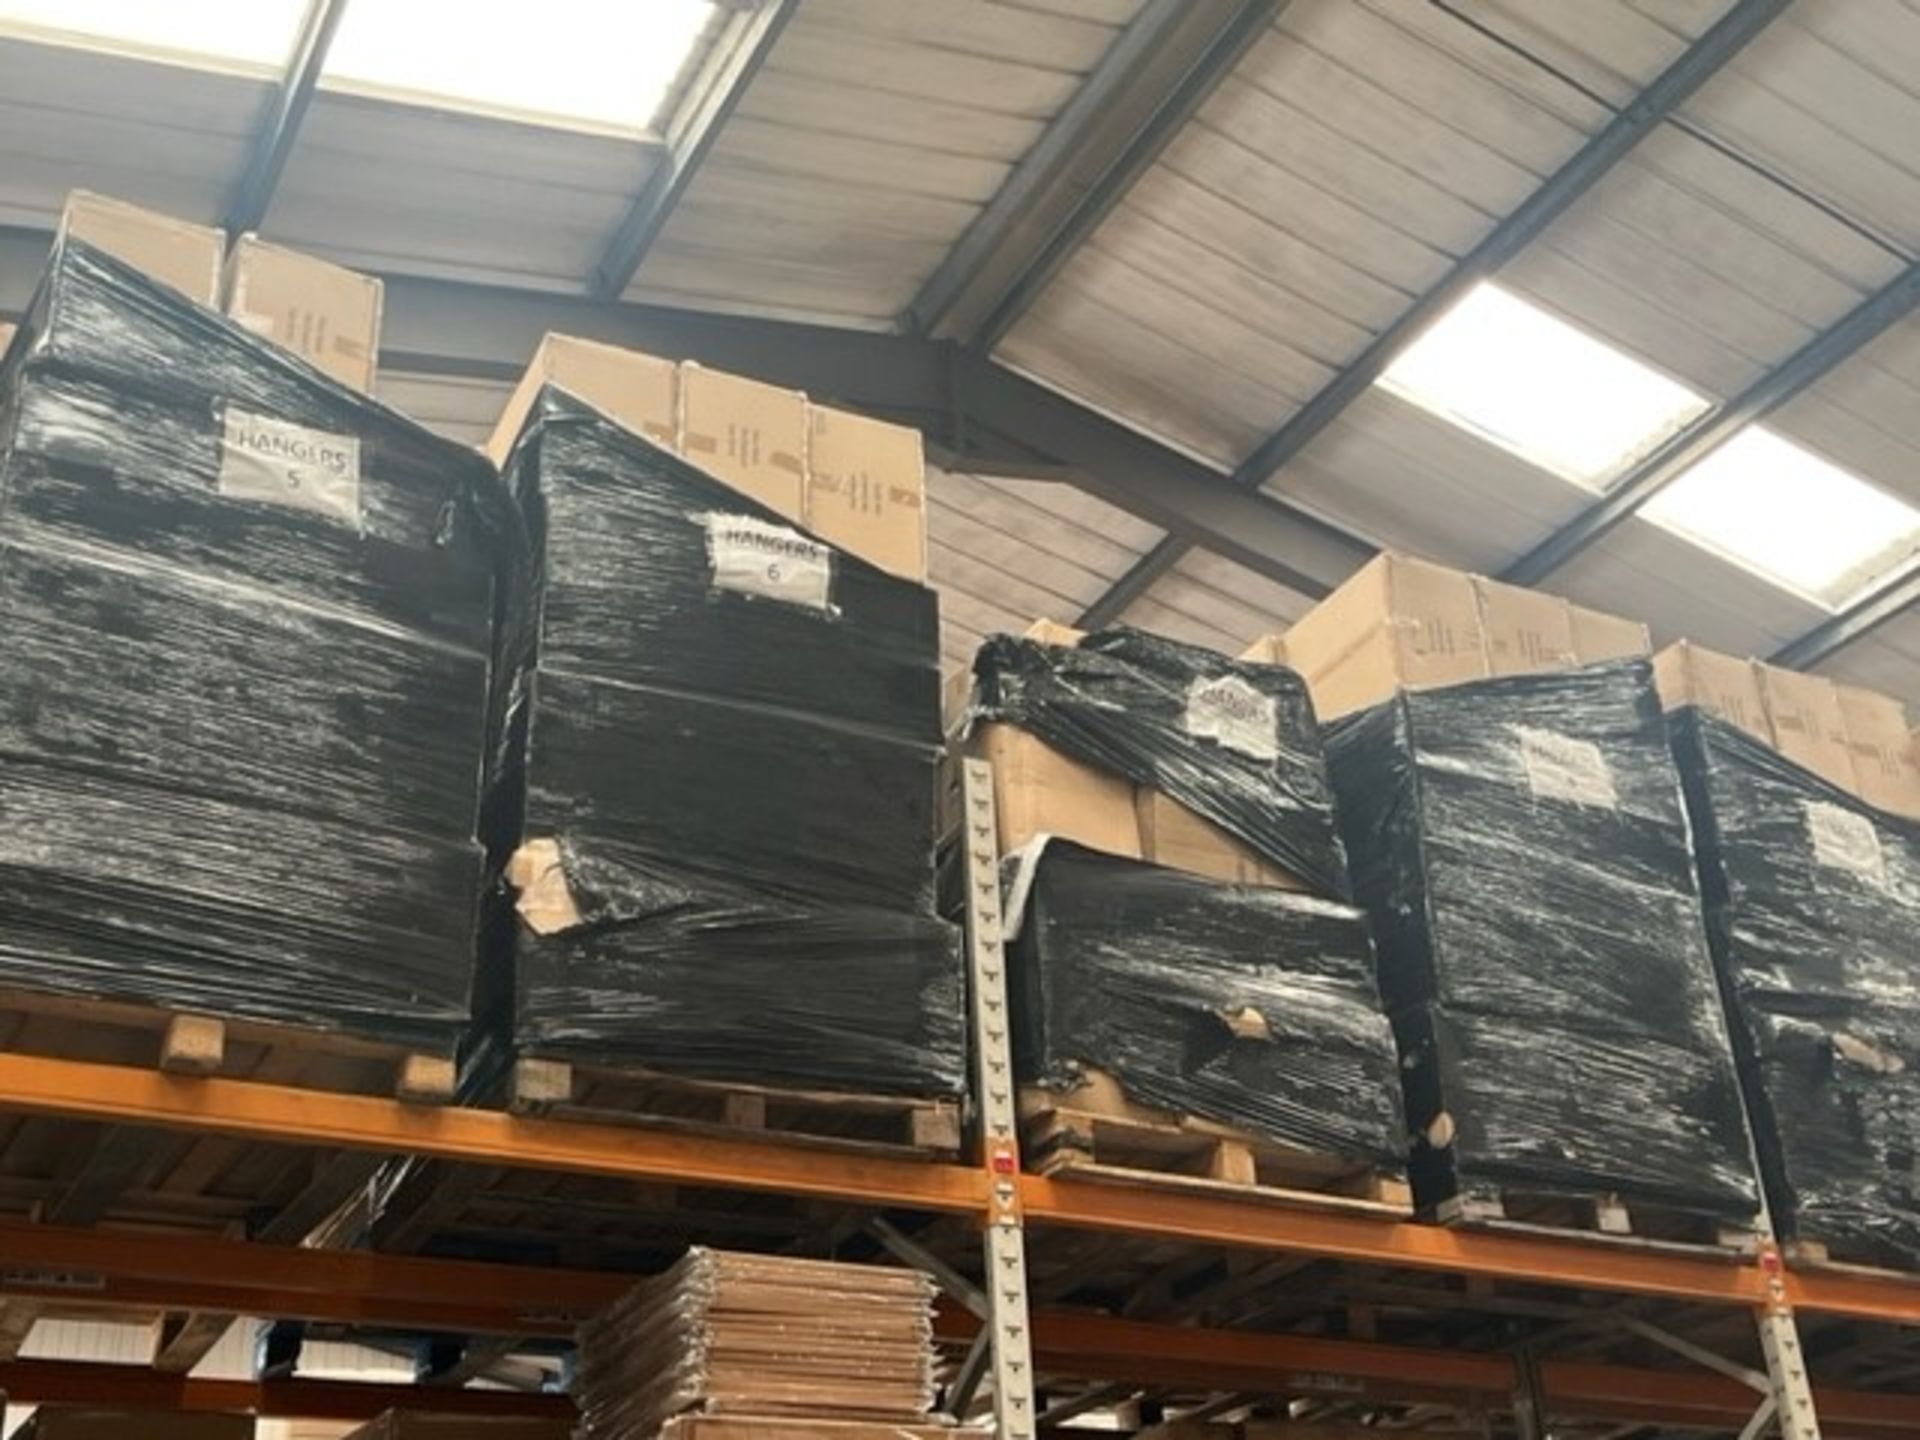 1 PALLET OF 1750 X WOODEN SECURITY COATHANGERS DARK WOOD WITH METAL BAR & SKIRT CLIPS - Image 4 of 4